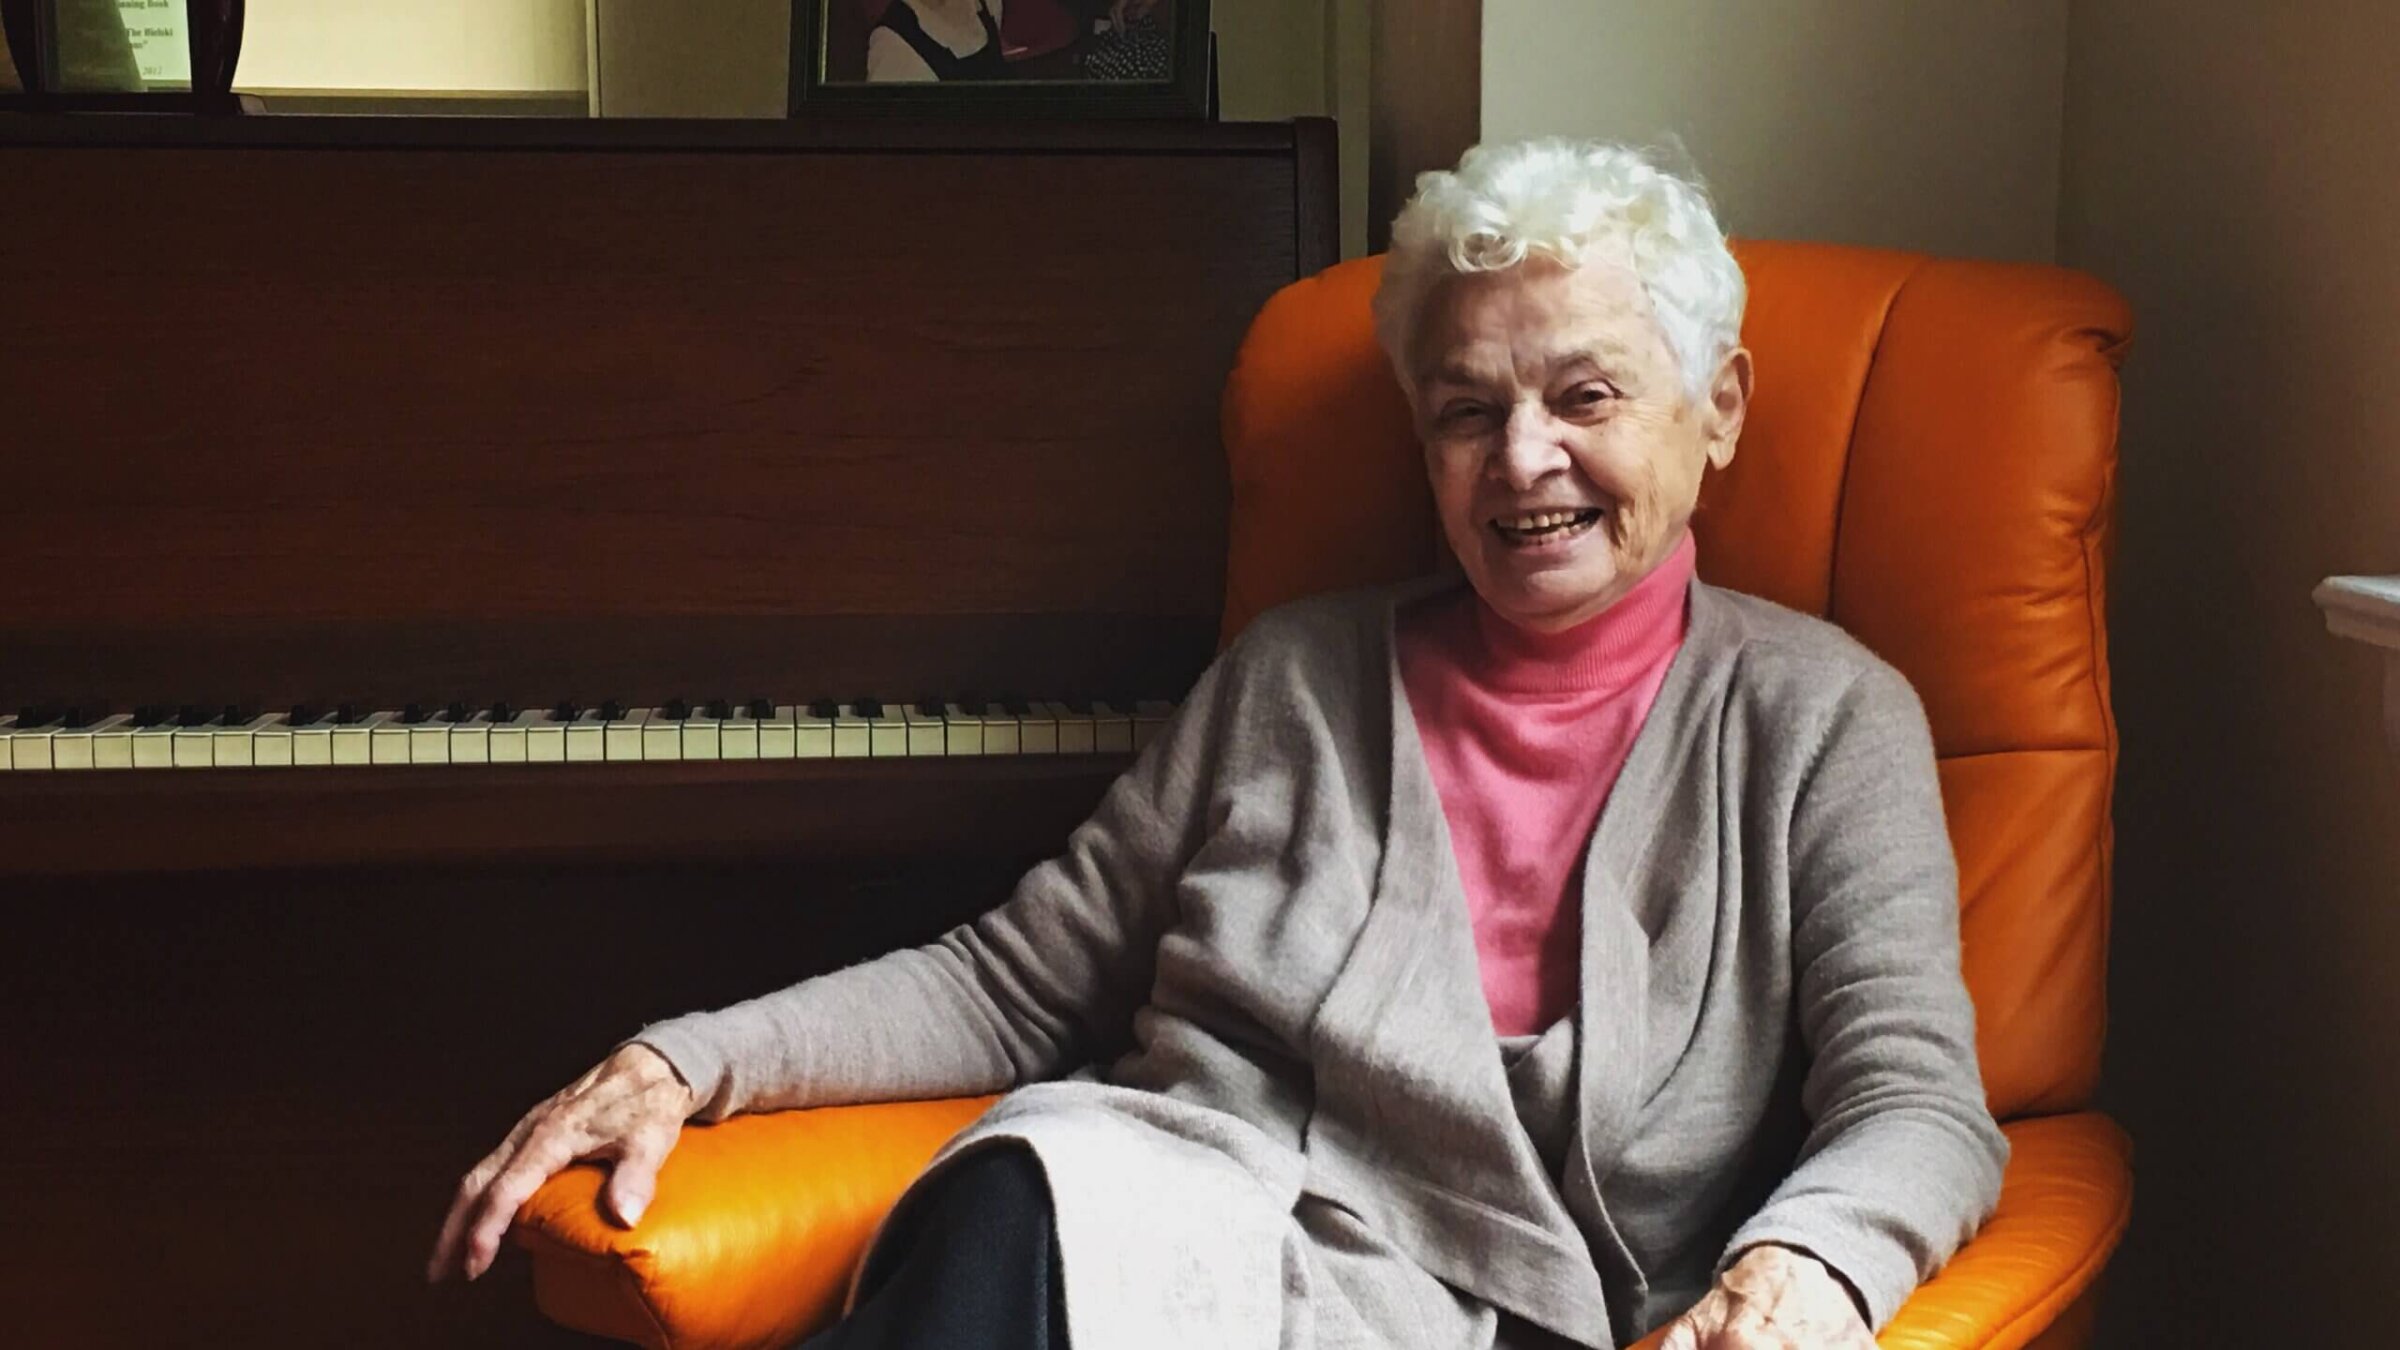 Nechama Tec's family was one of only three Jewish families from her hometown of Lublin, from a prewar population of around 40,000, that survived the Holocaust intact.